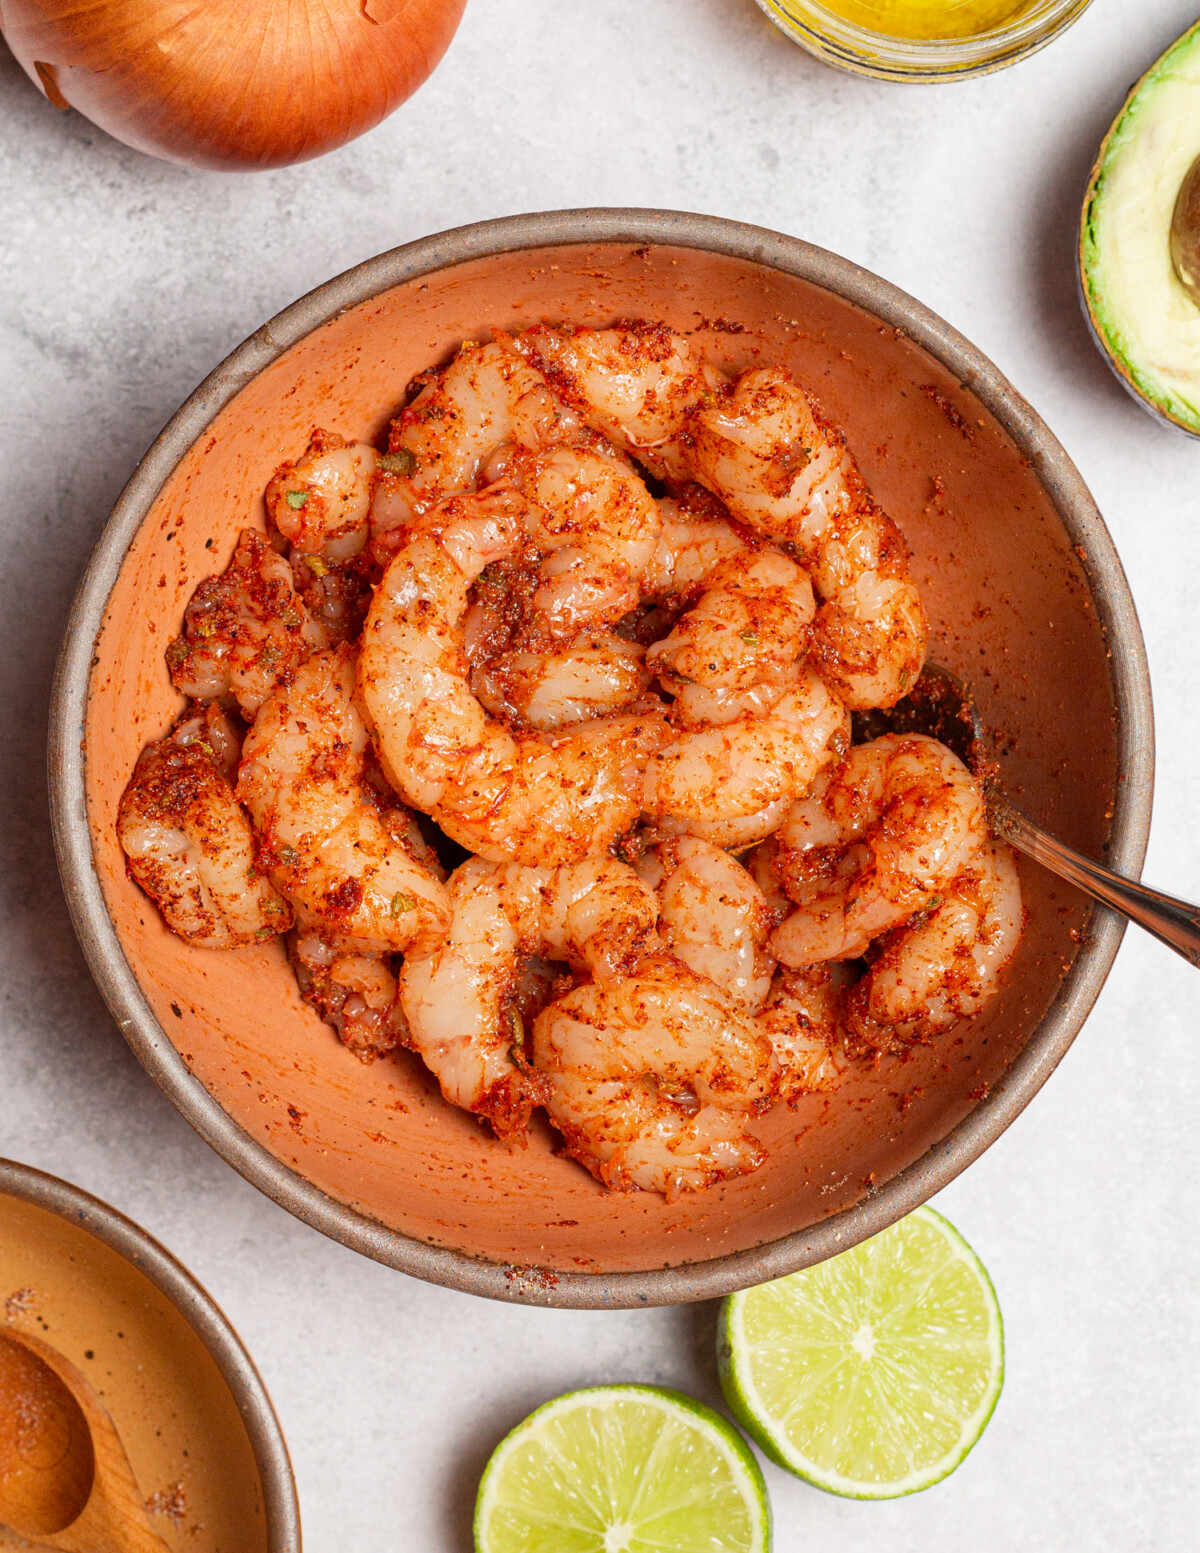 Seasoning raw shrimp with spice mix in a small bowl.